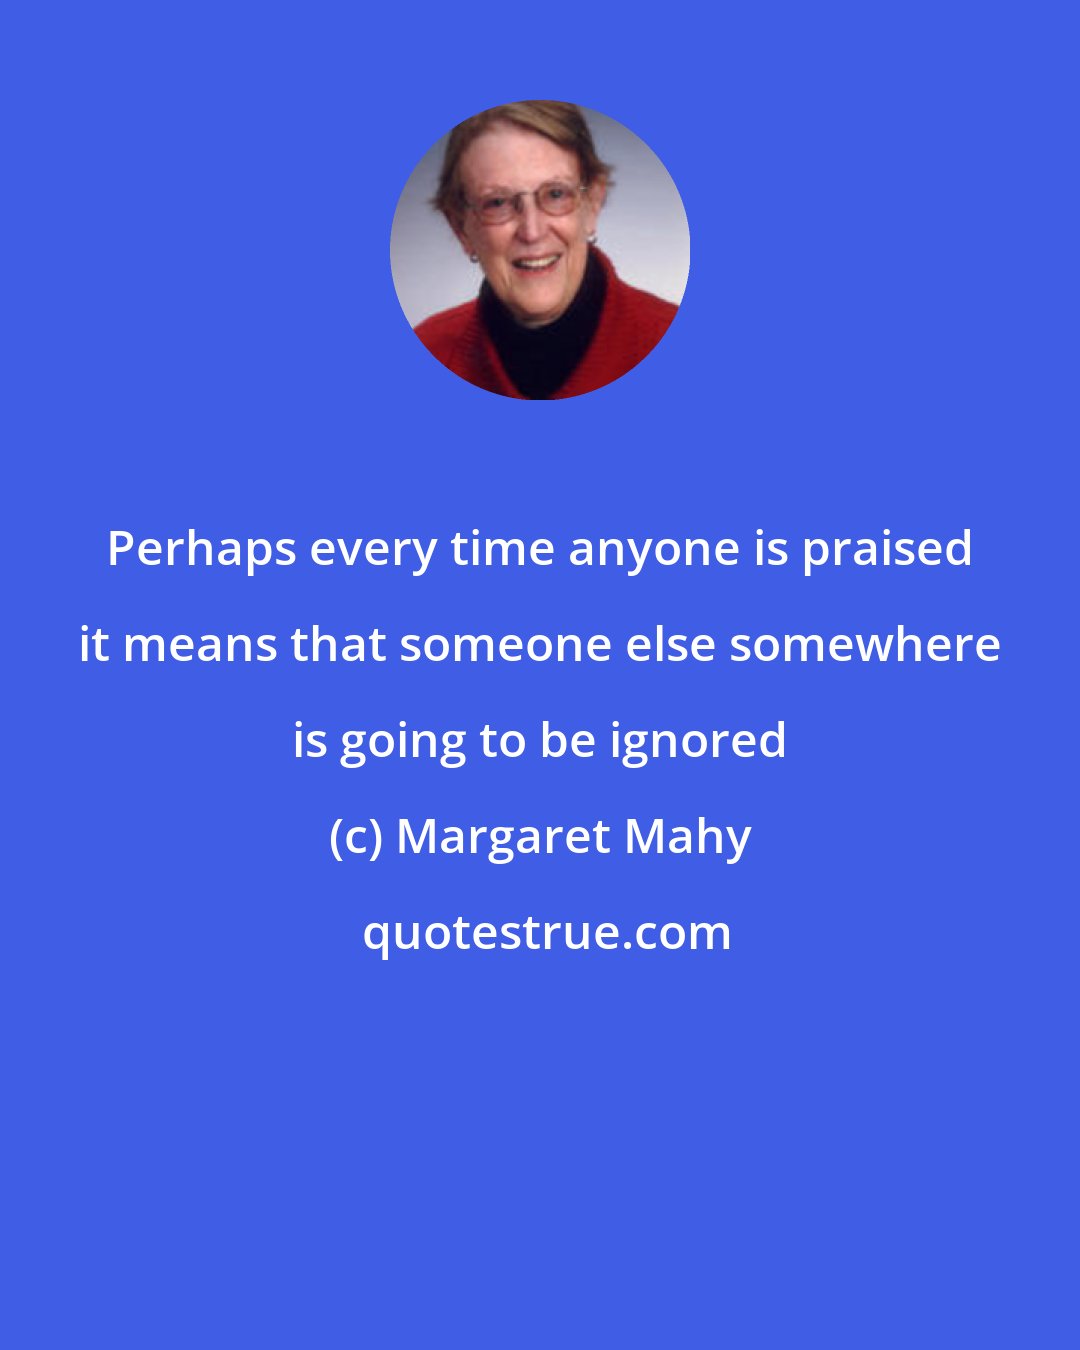 Margaret Mahy: Perhaps every time anyone is praised it means that someone else somewhere is going to be ignored